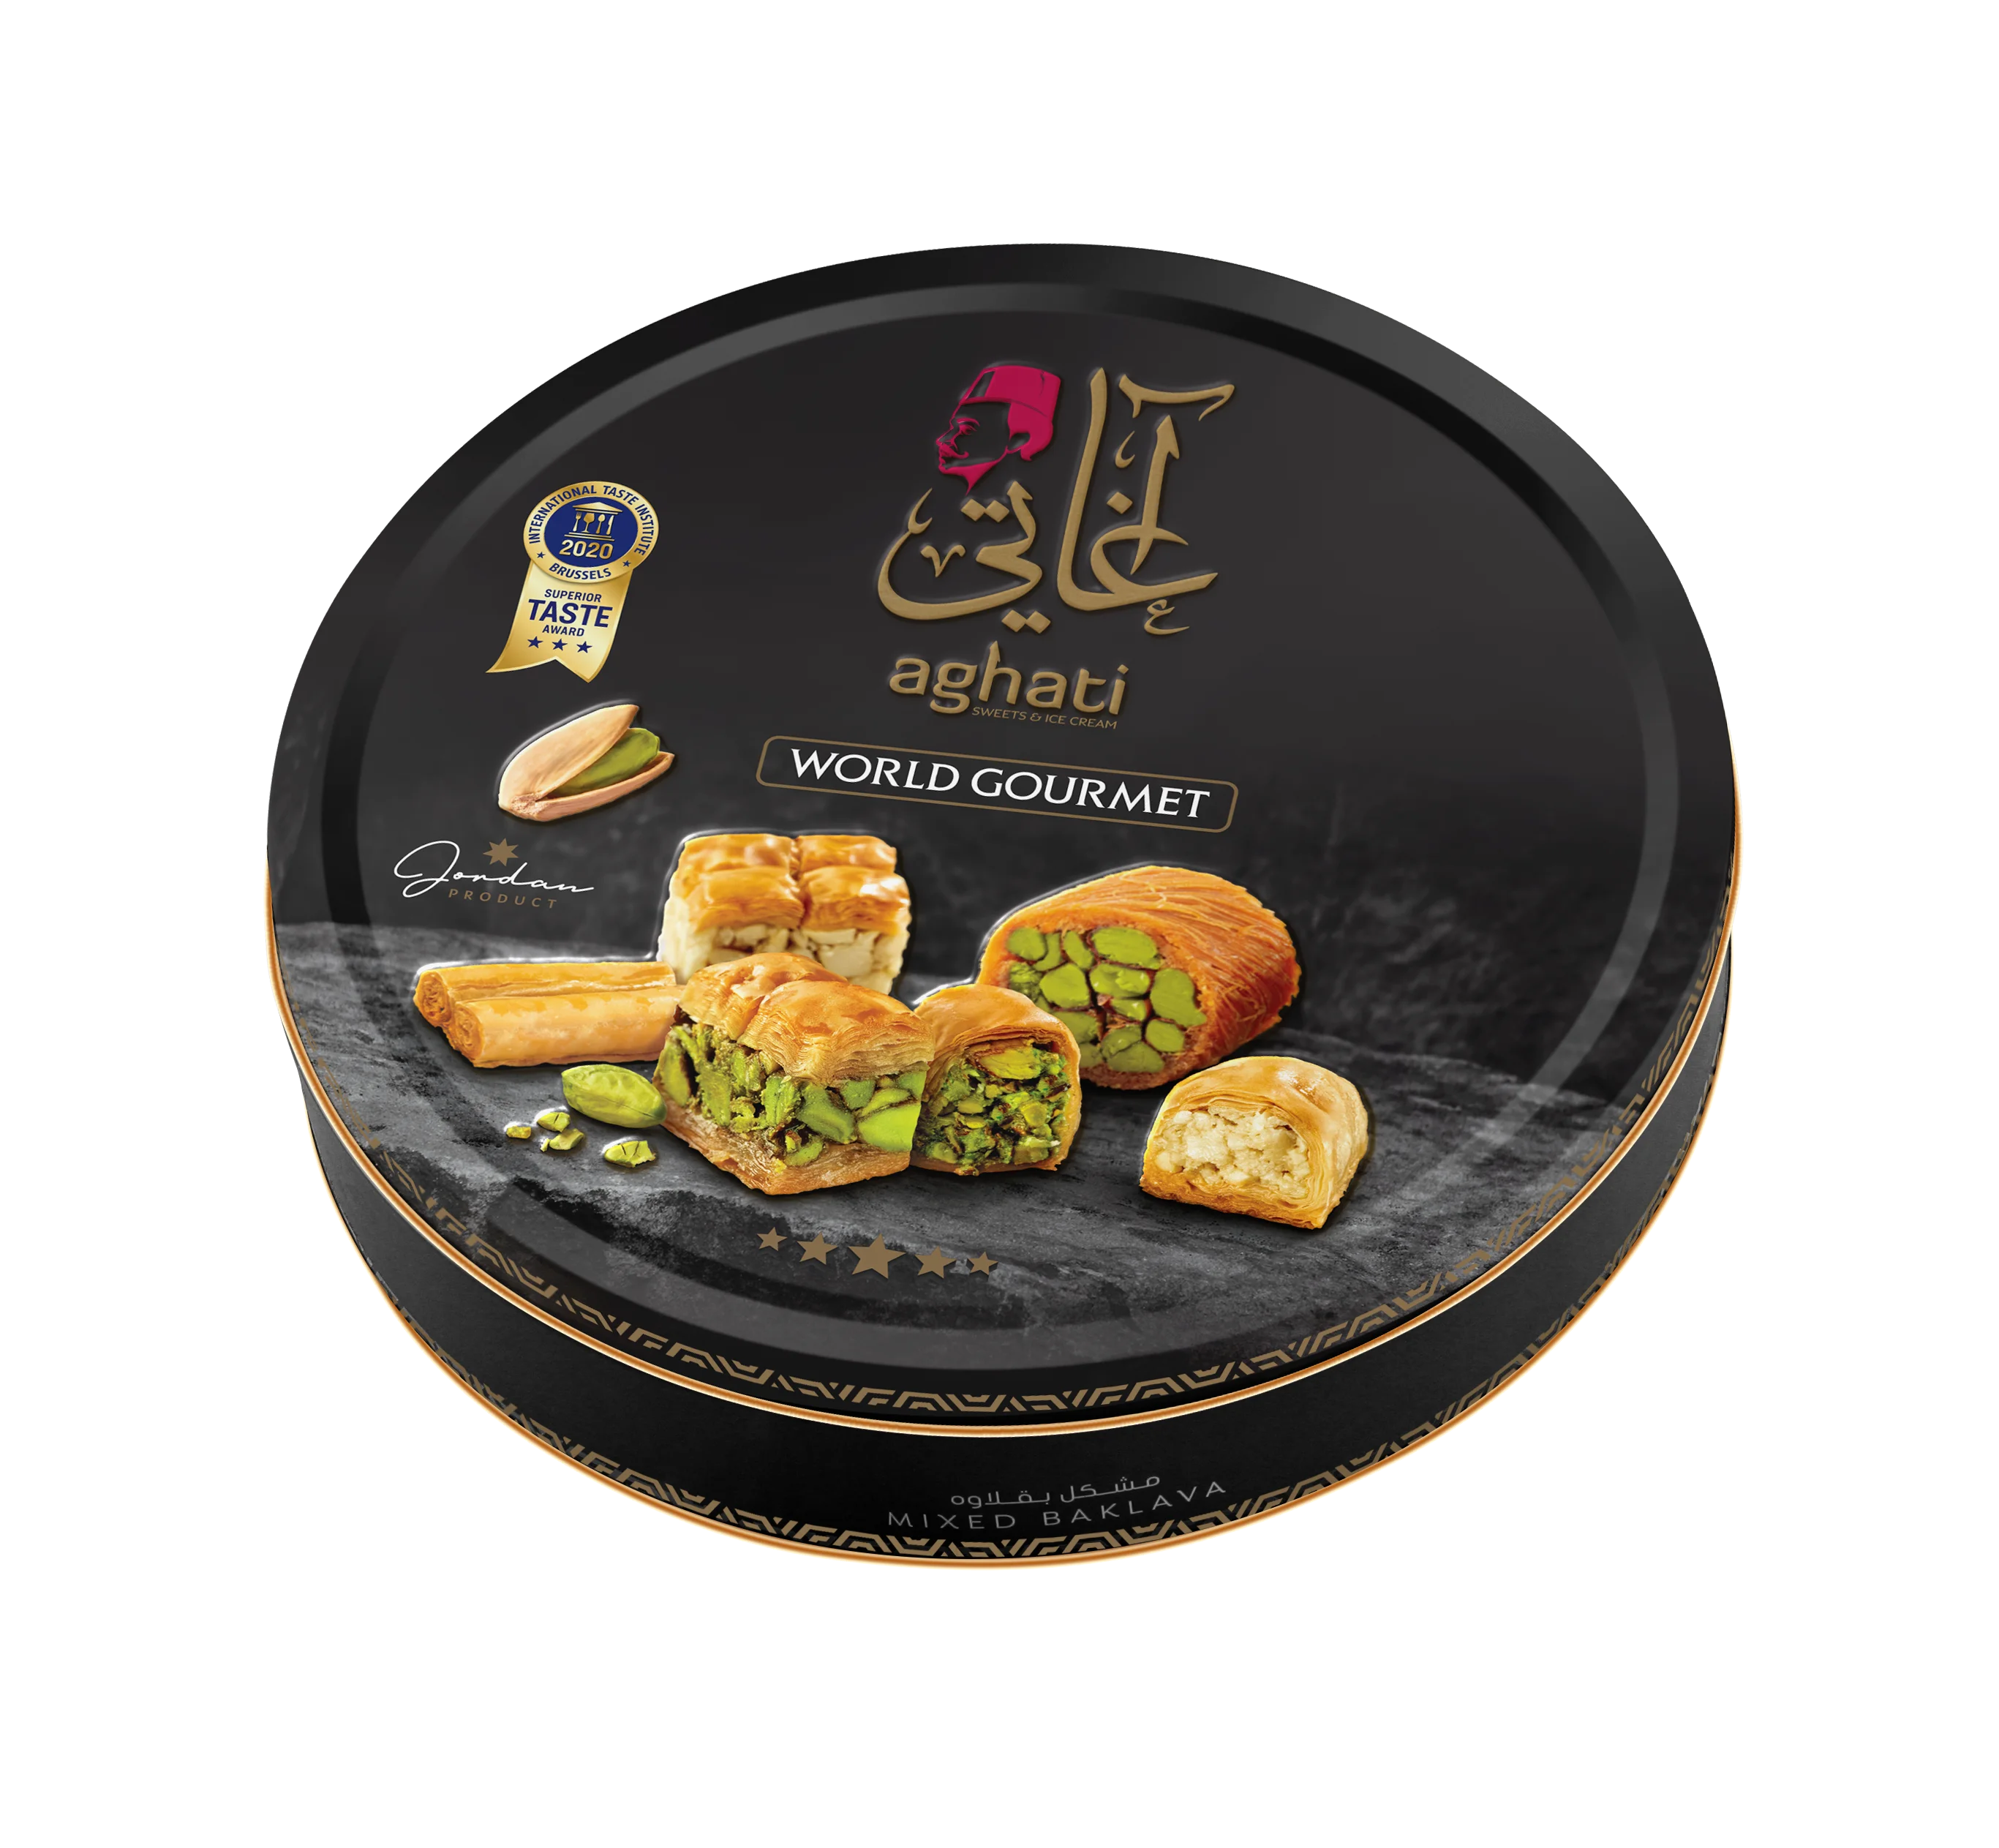 Trending Hot Savory tin Box Pack Cookies Rich Nuts Crackers Delicate desserts multiple flavors Baklawa Super Mix 1kg